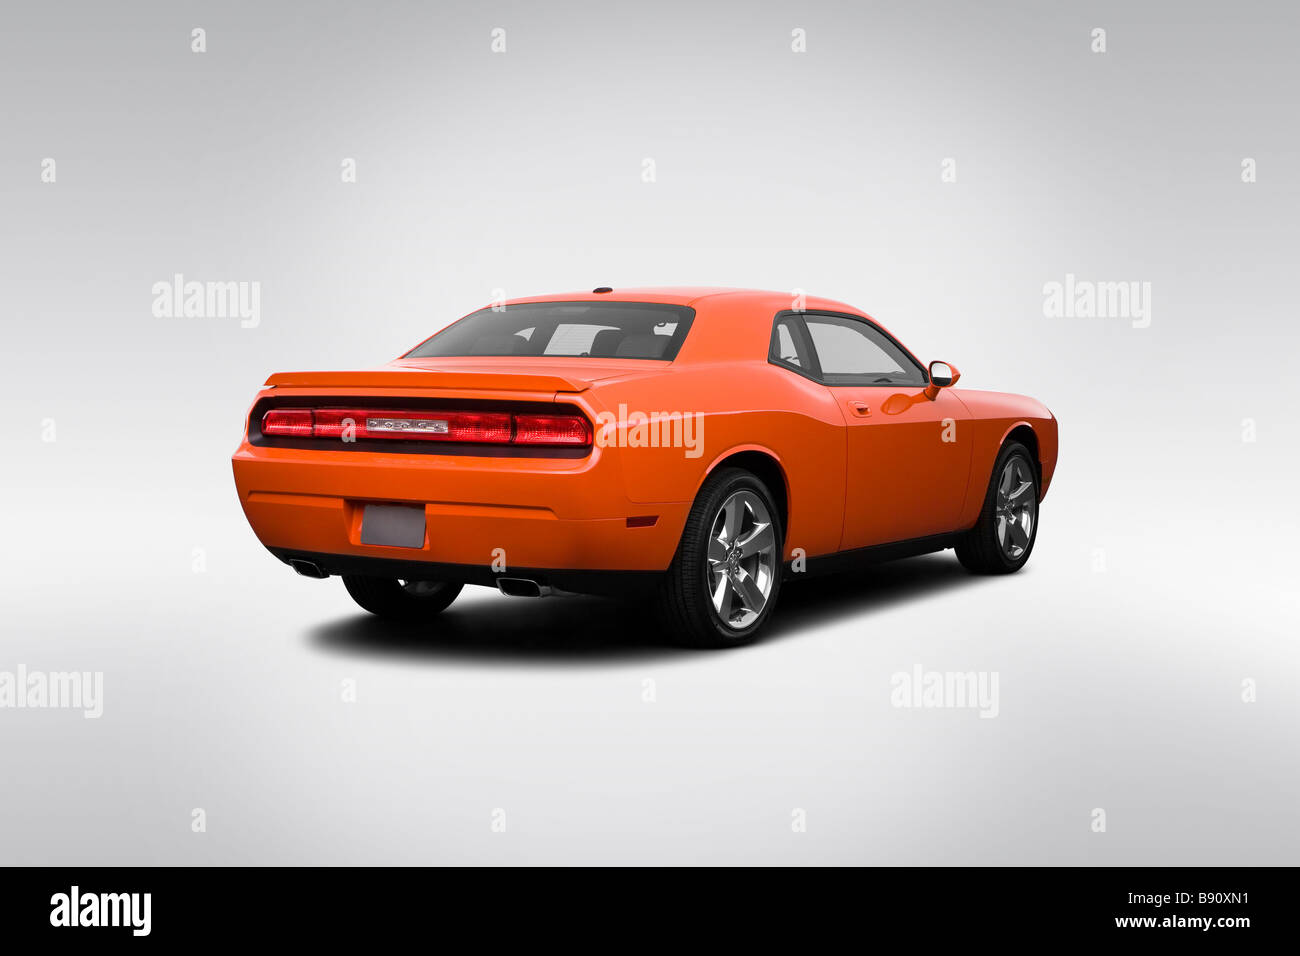 2009 Dodge Challenger R/T in Orange - Rear angle view Stock Photo